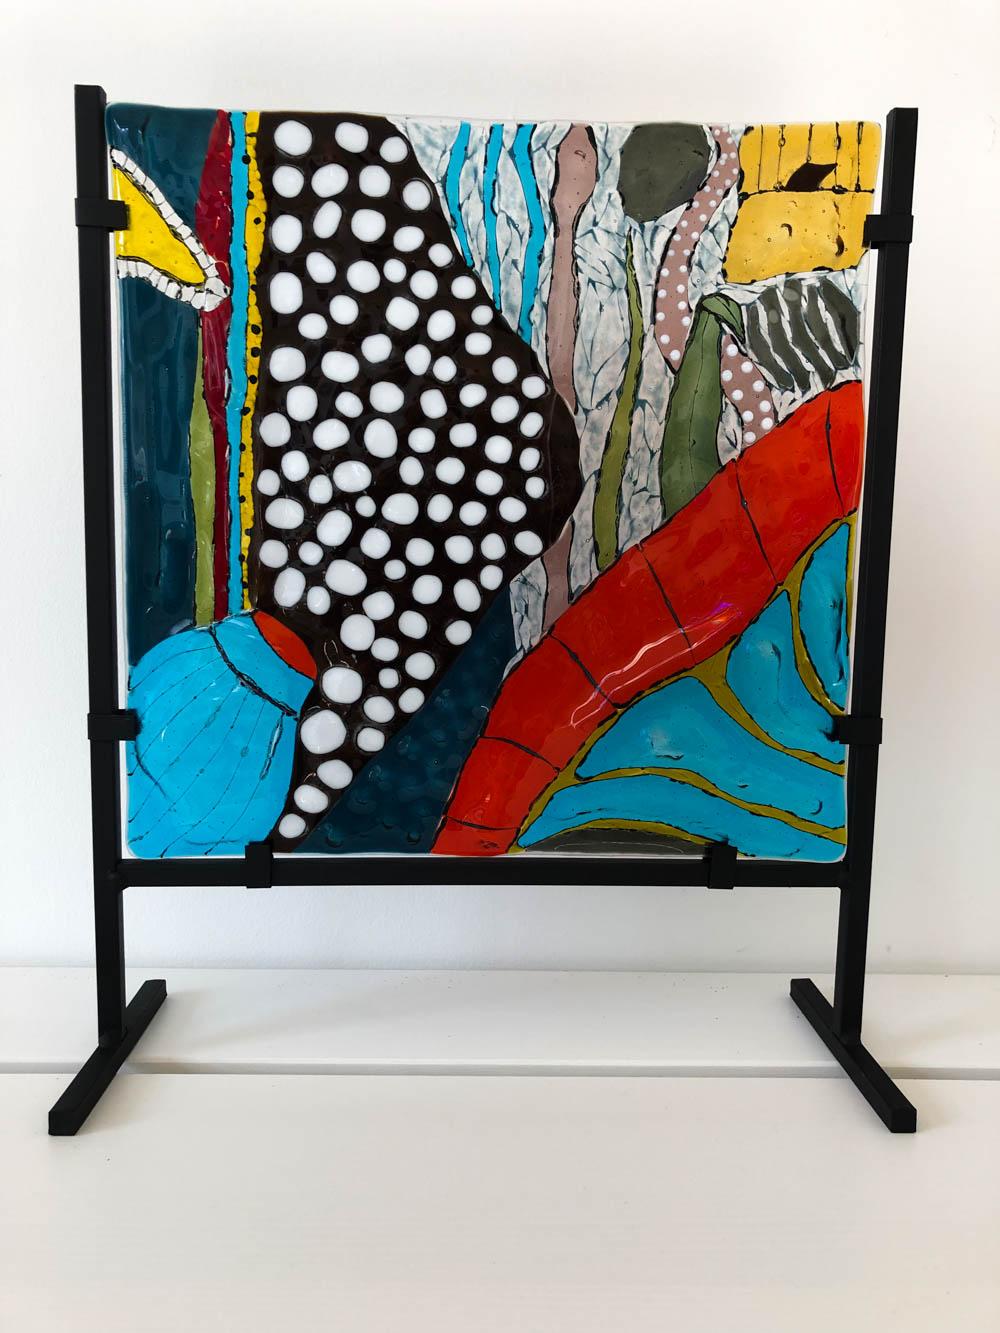 30x30cm glass panel shown in black cast iron gallery stand